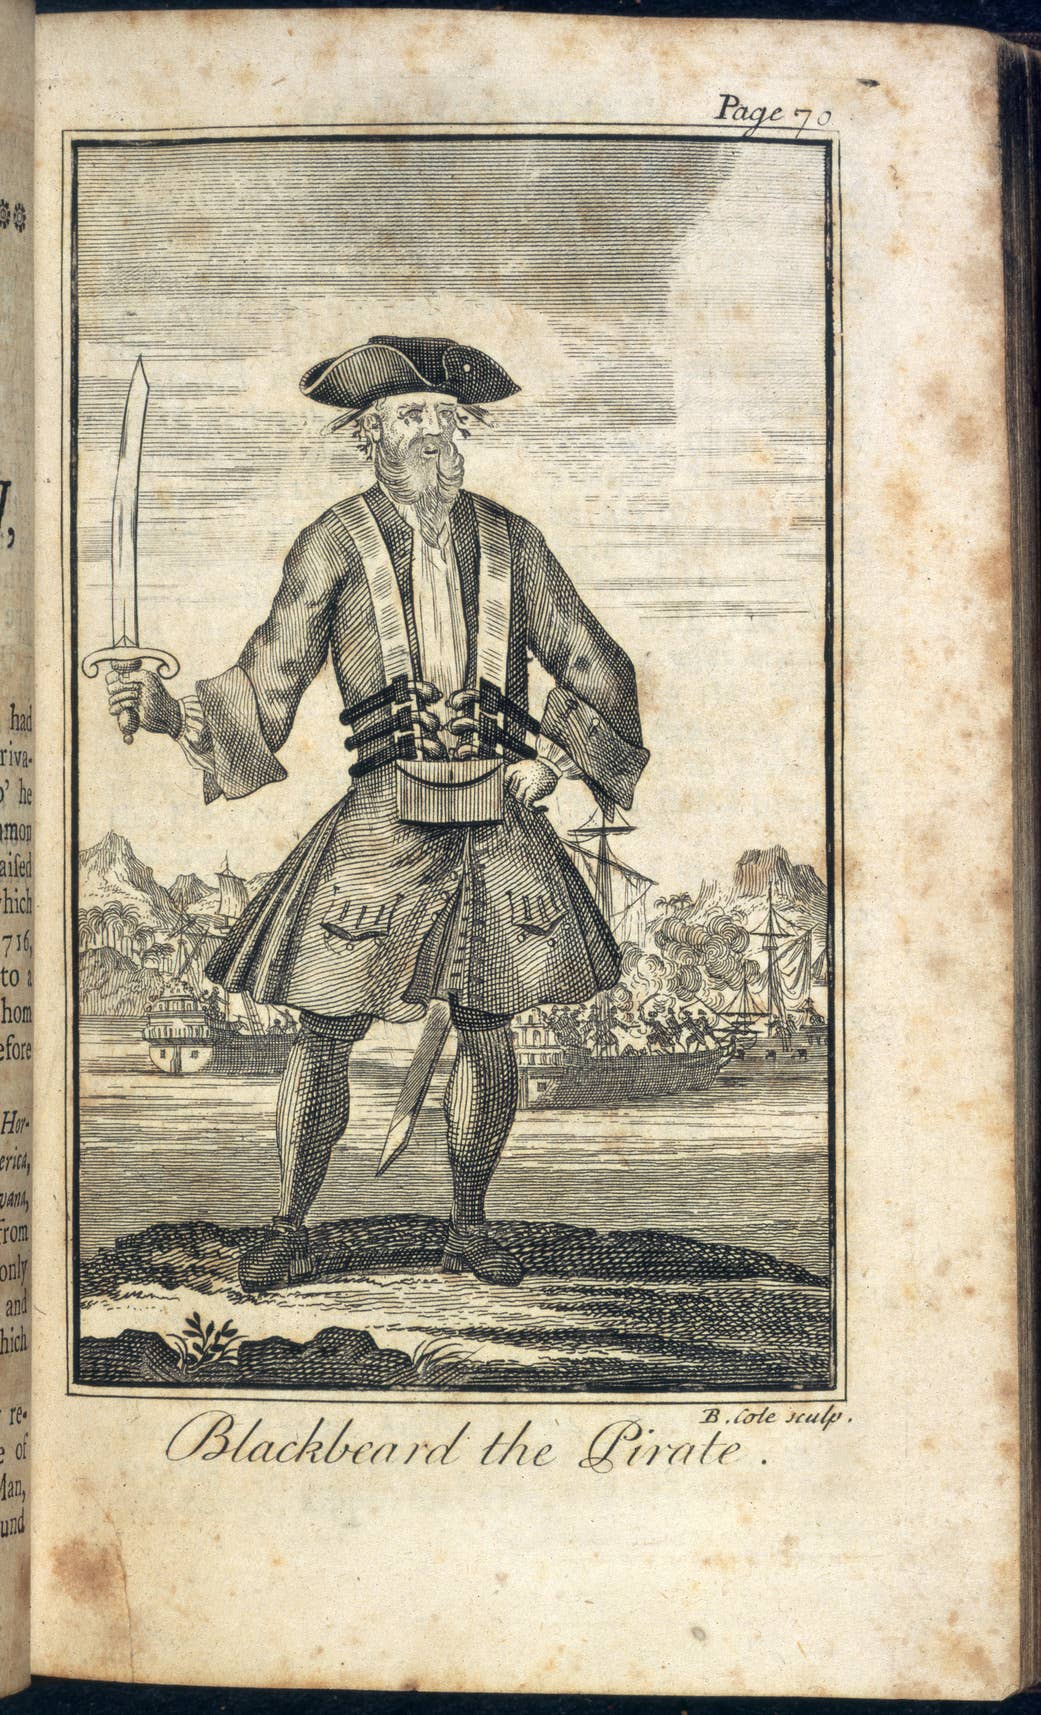 A 1725 portrait of Blackbeard, also known as Edward Teach, as originally published in <em>A General History of the Pyrates</em>. <em>British Library</em>